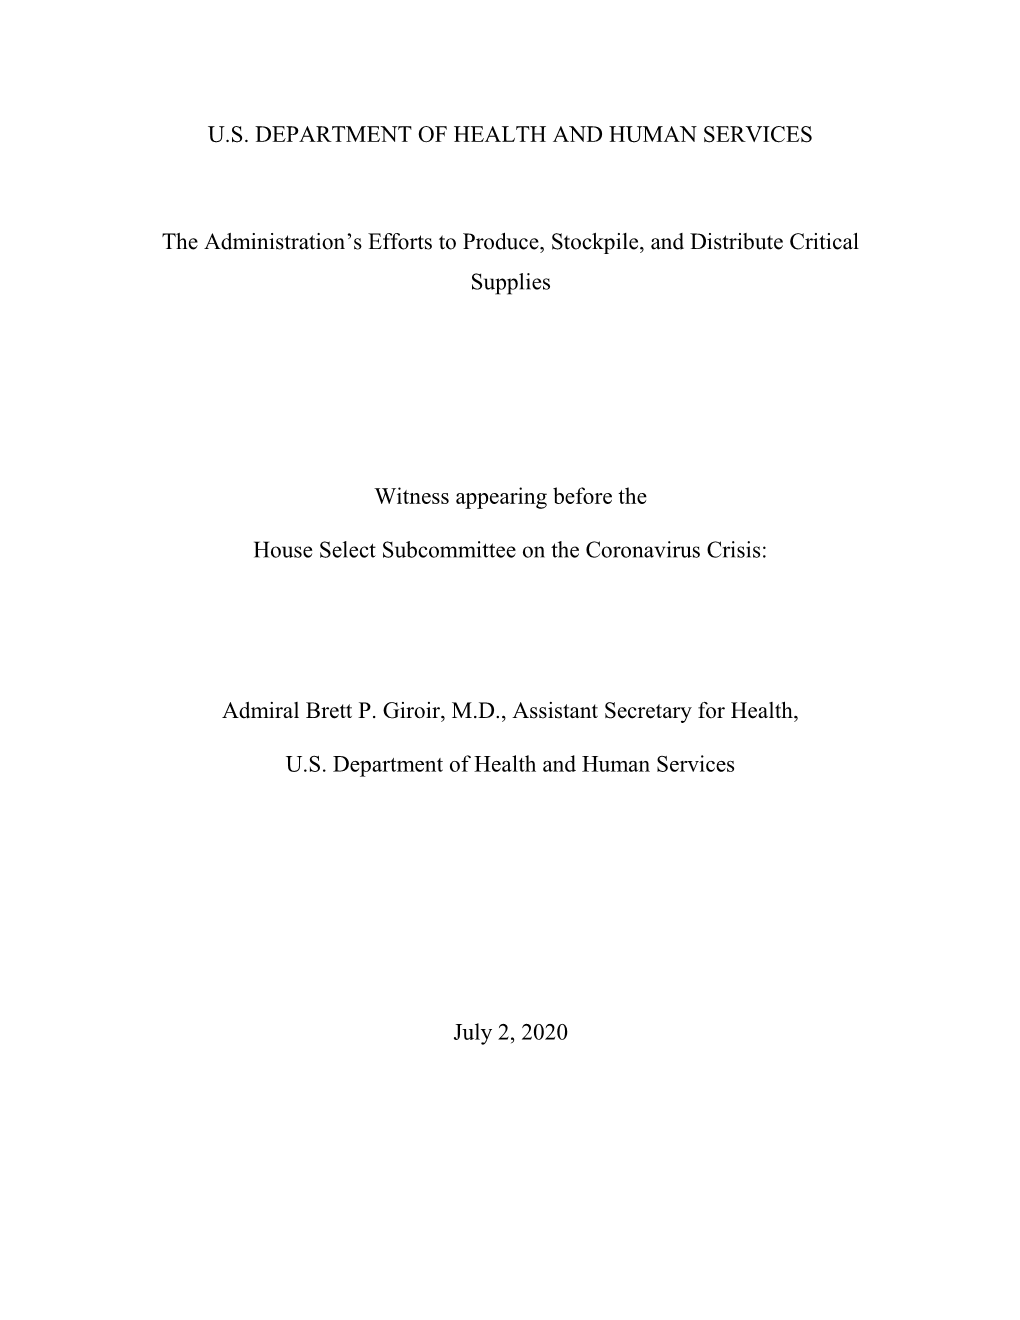 U.S. DEPARTMENT of HEALTH and HUMAN SERVICES the Administration's Efforts to Produce, Stockpile, and Distribute Critical Suppl